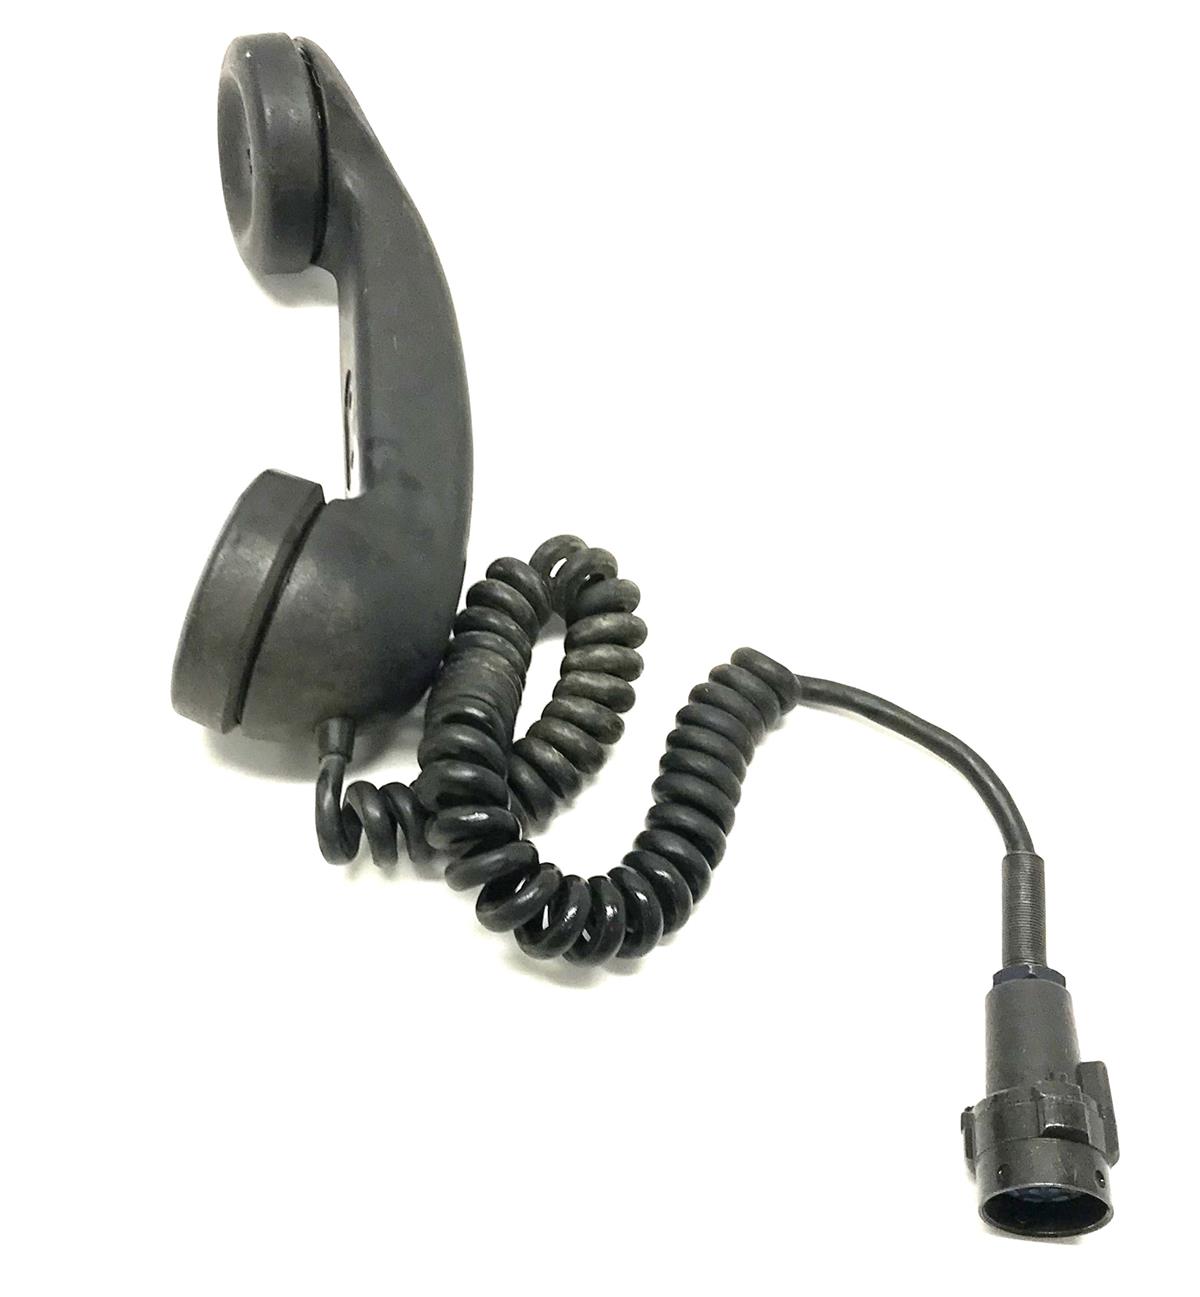 SP-2250 | SP-2250  ANGSA-6C Chest Set Group With Headset Microphone and Handset with U-77U Connector  (45).JPG